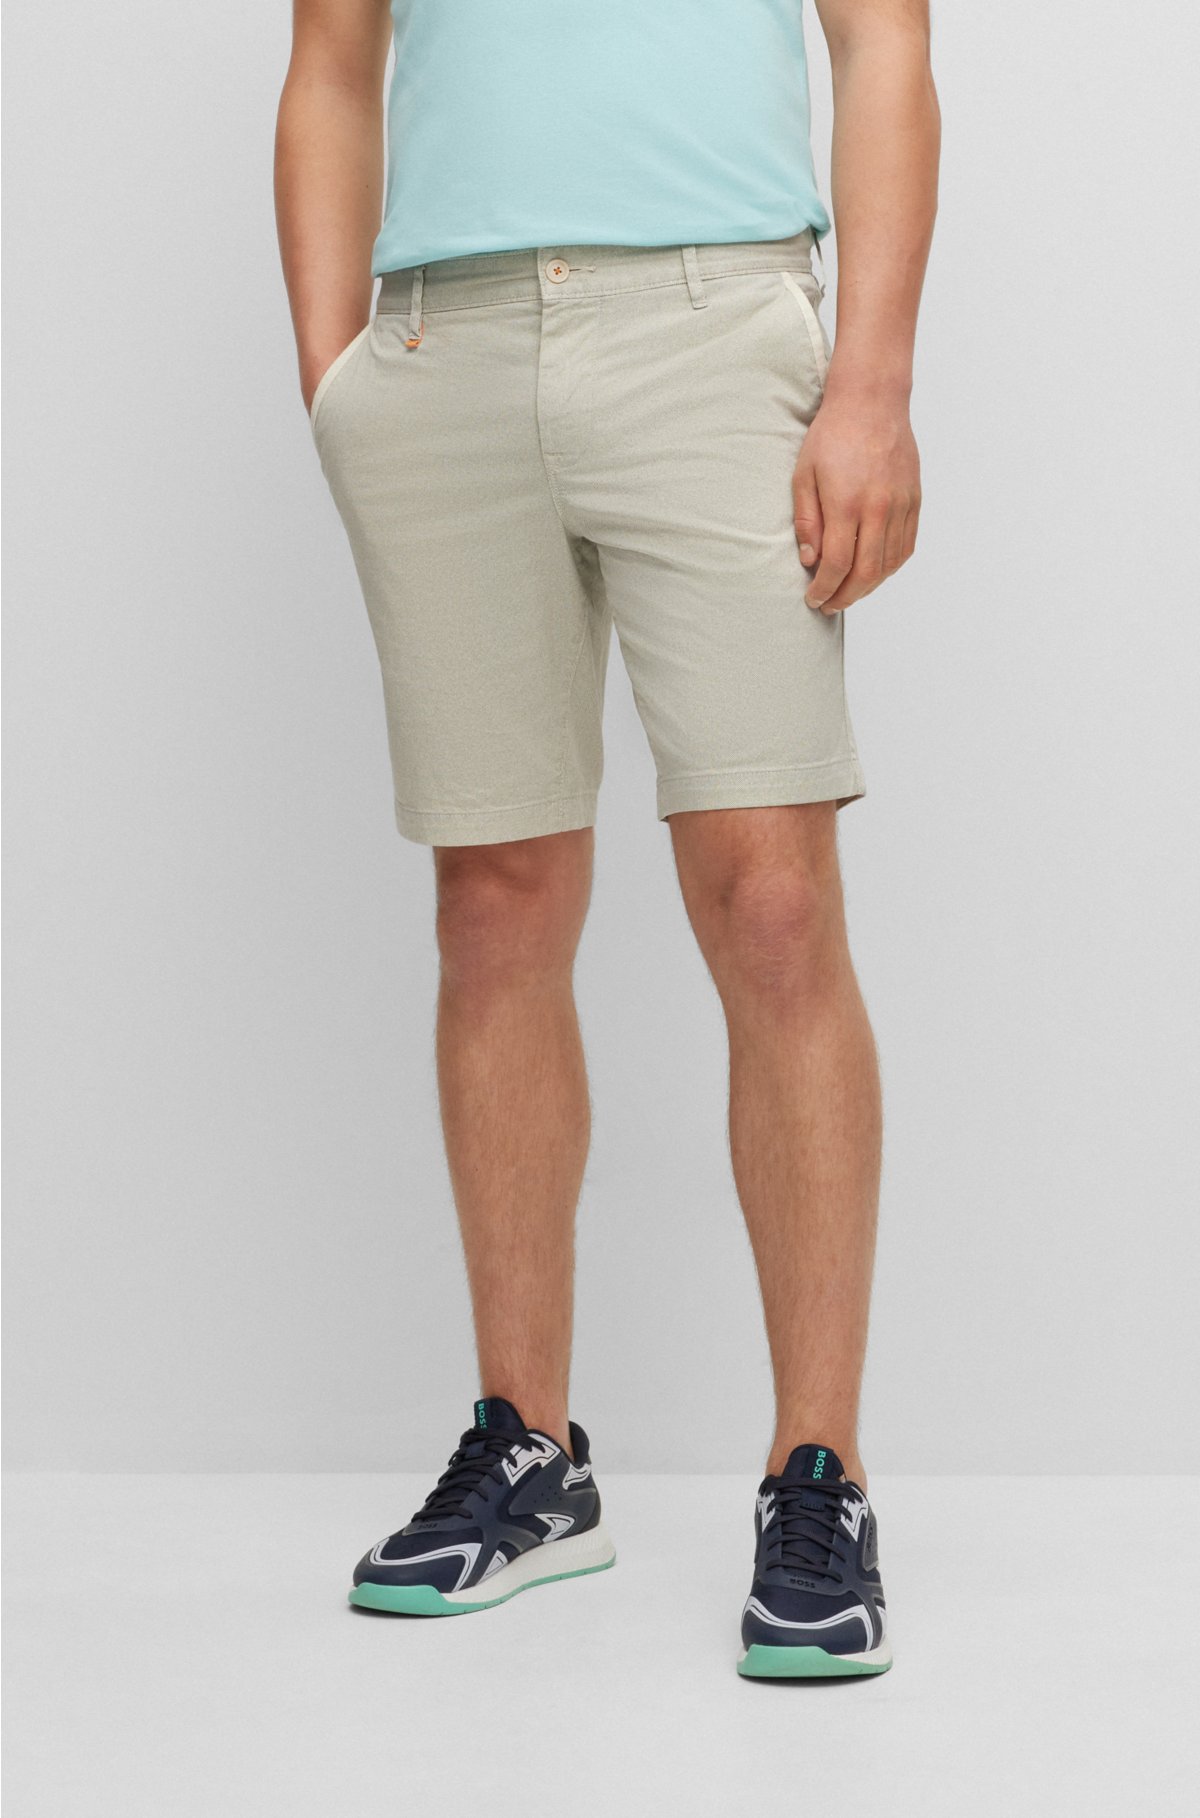 BOSS - Slim-fit shorts in printed stretch-cotton twill